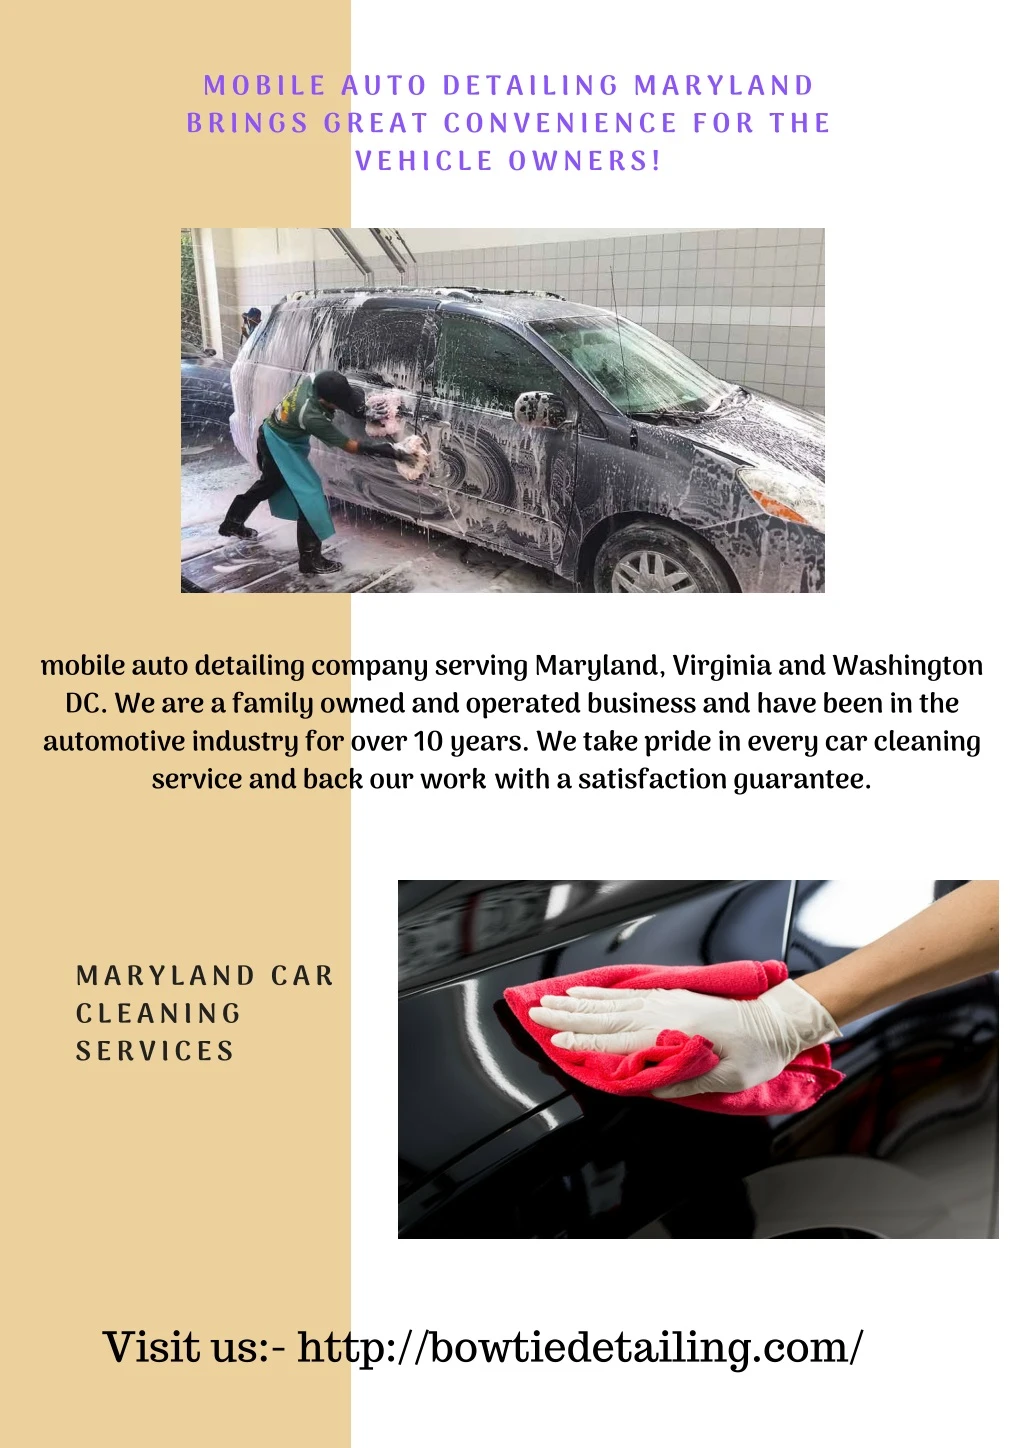 mobile auto detailing maryland brings great